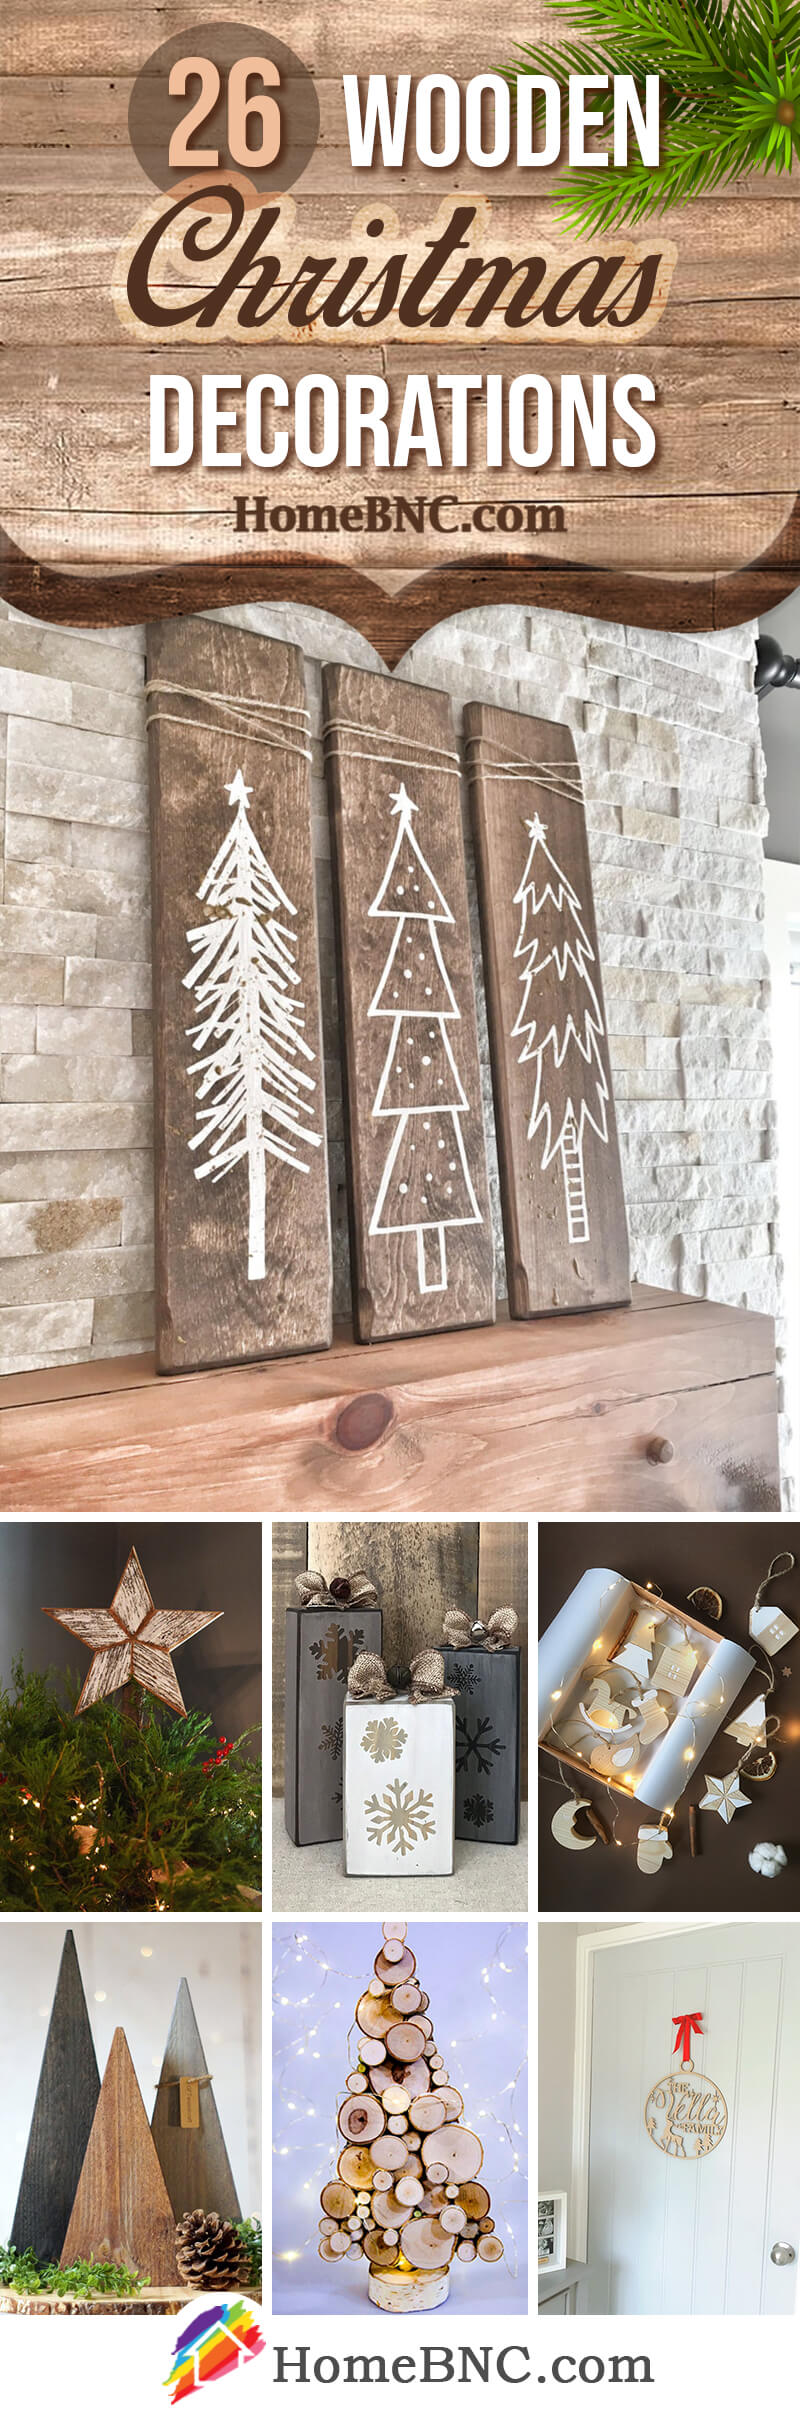 Best Wooden Christmas Decorations